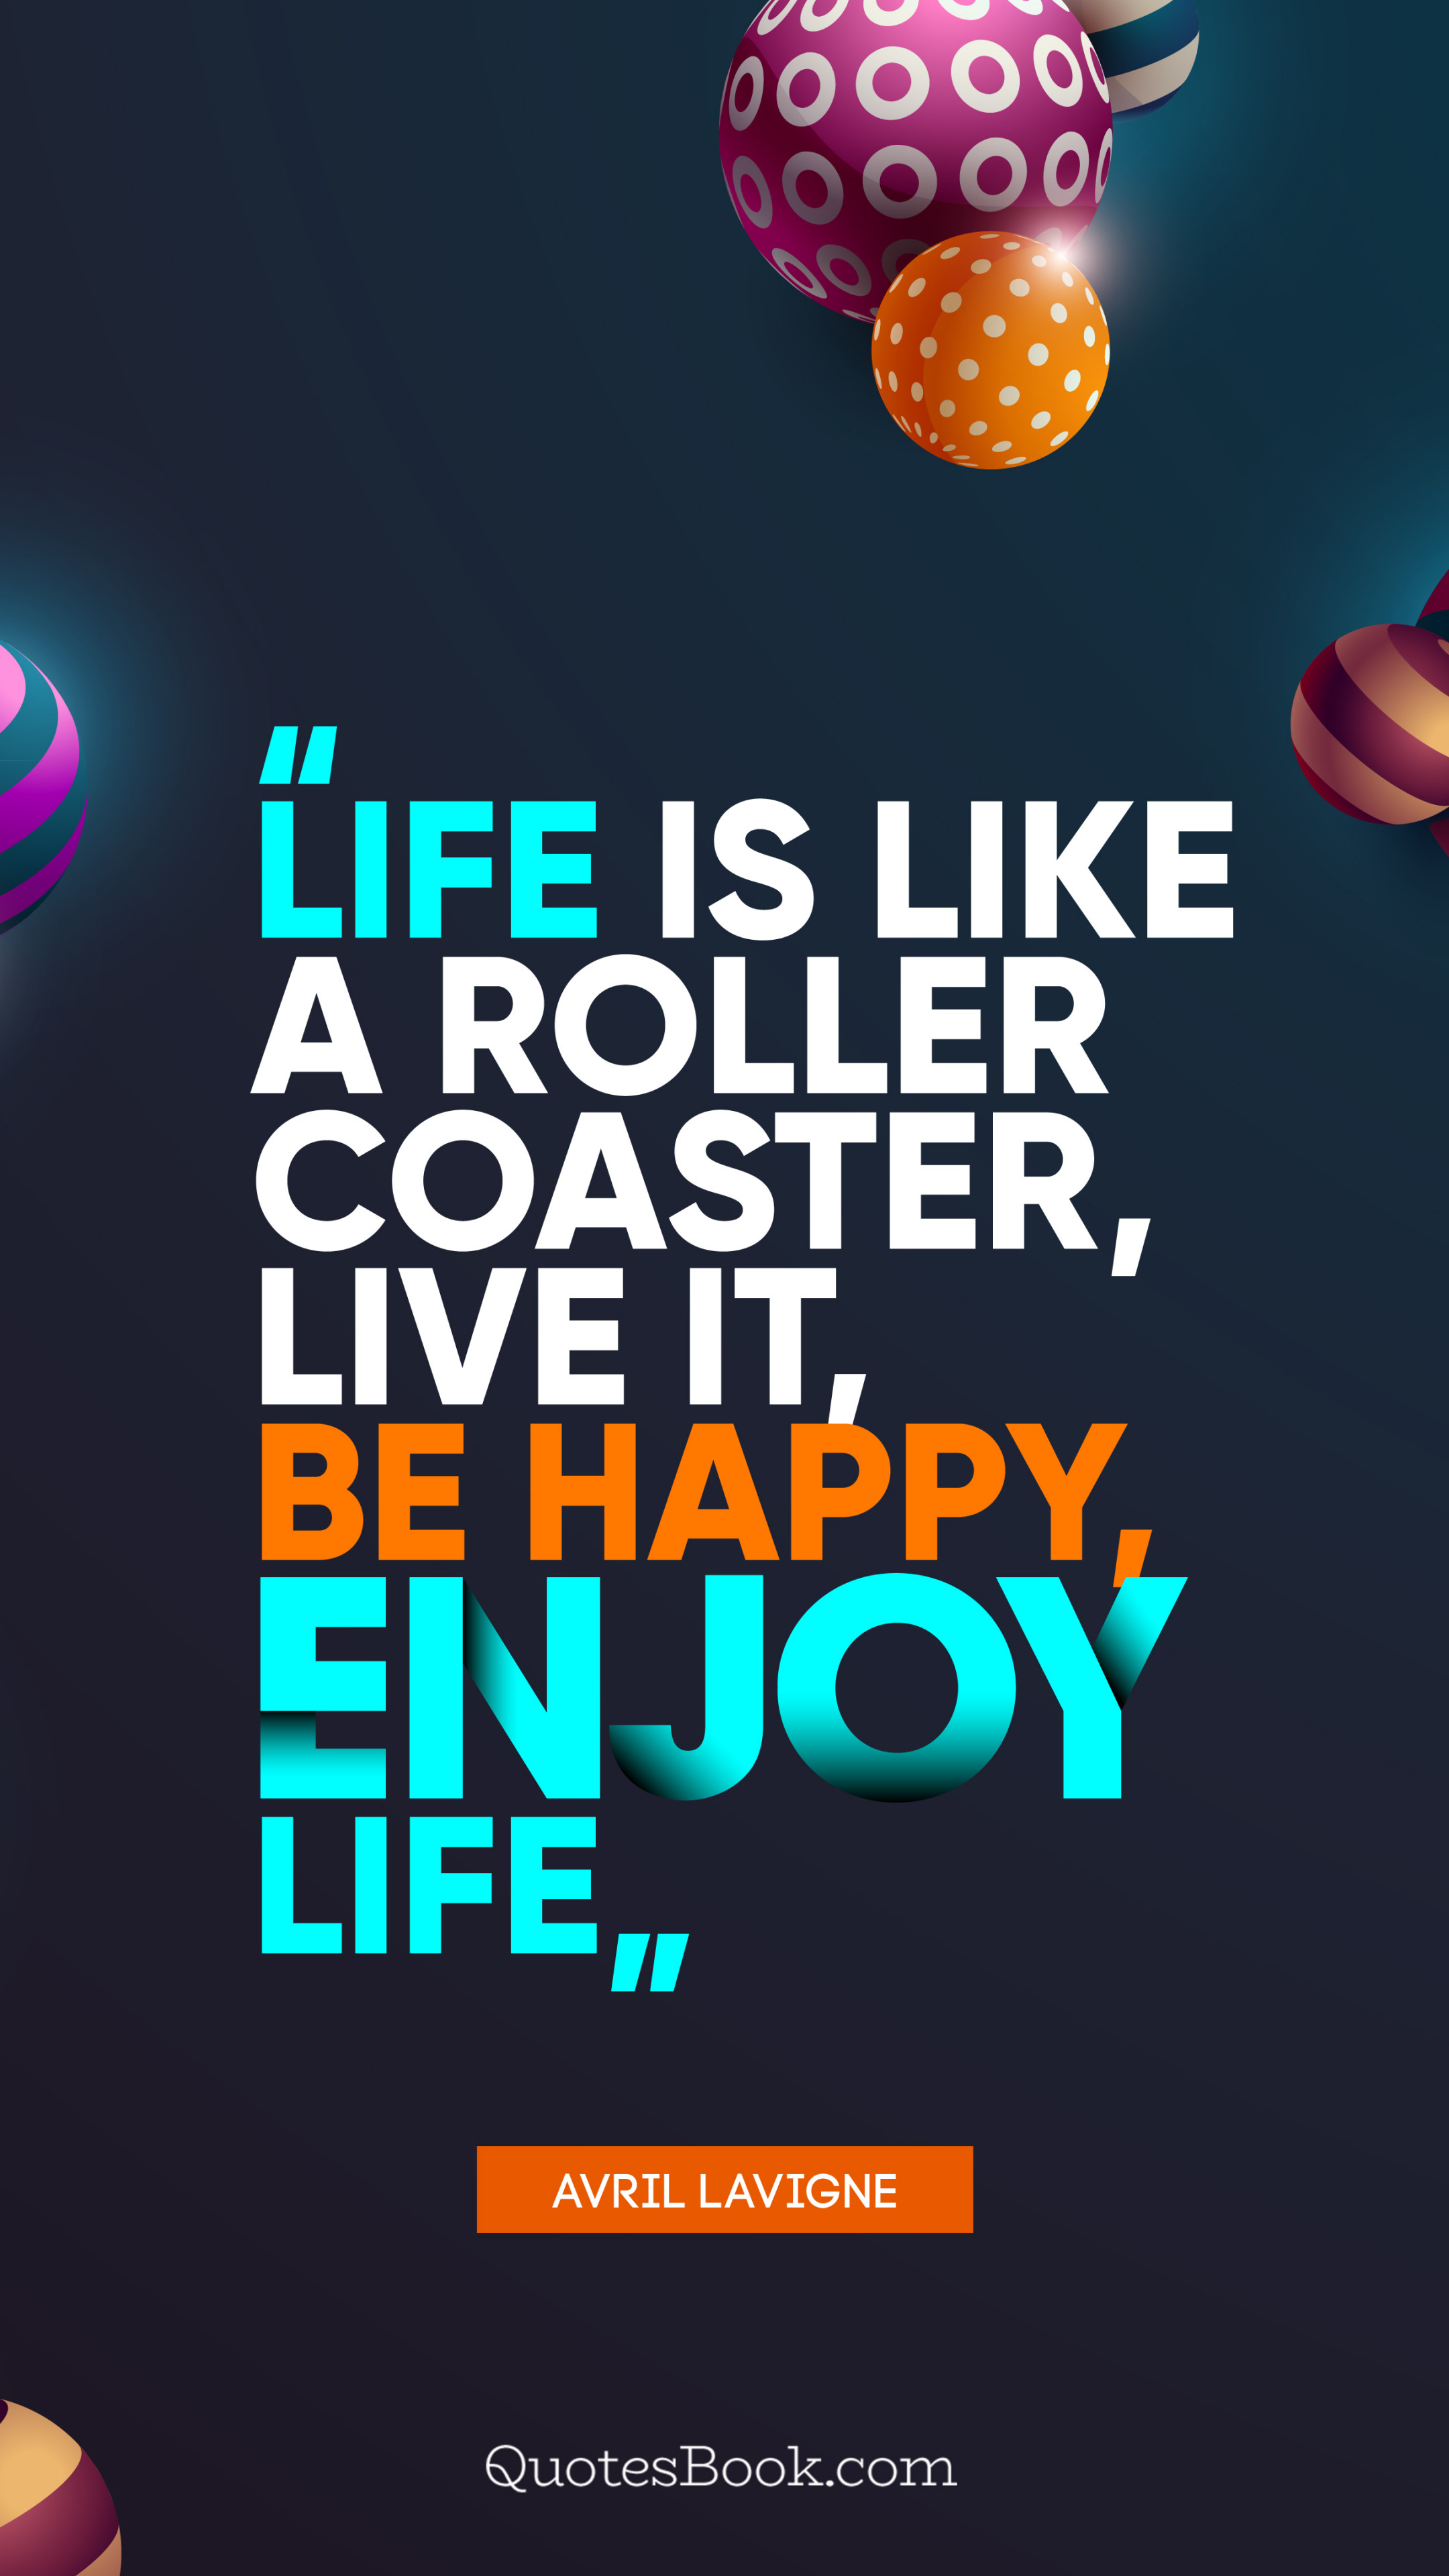 Life Is Like A Roller Coaster Live It Be Happy Enjoy Life Quote By Avril Lavigne Quotesbook